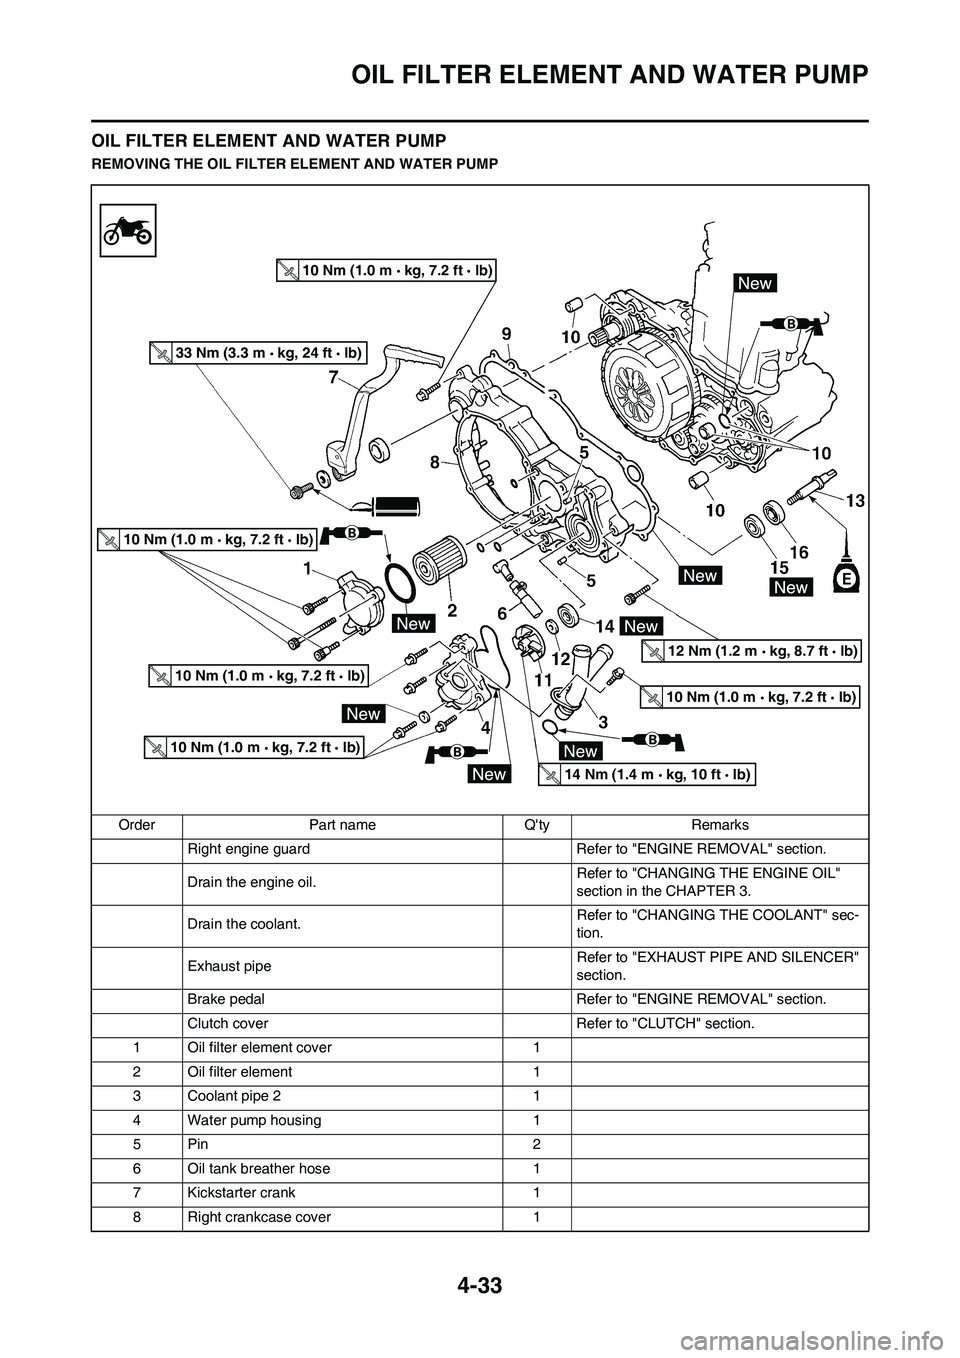 YAMAHA YZ450F 2009  Owners Manual 4-33
OIL FILTER ELEMENT AND WATER PUMP
OIL FILTER ELEMENT AND WATER PUMP
REMOVING THE OIL FILTER ELEMENT AND WATER PUMP
Order Part name Qty Remarks
Right engine guard  Refer to "ENGINE REMOVAL" secti